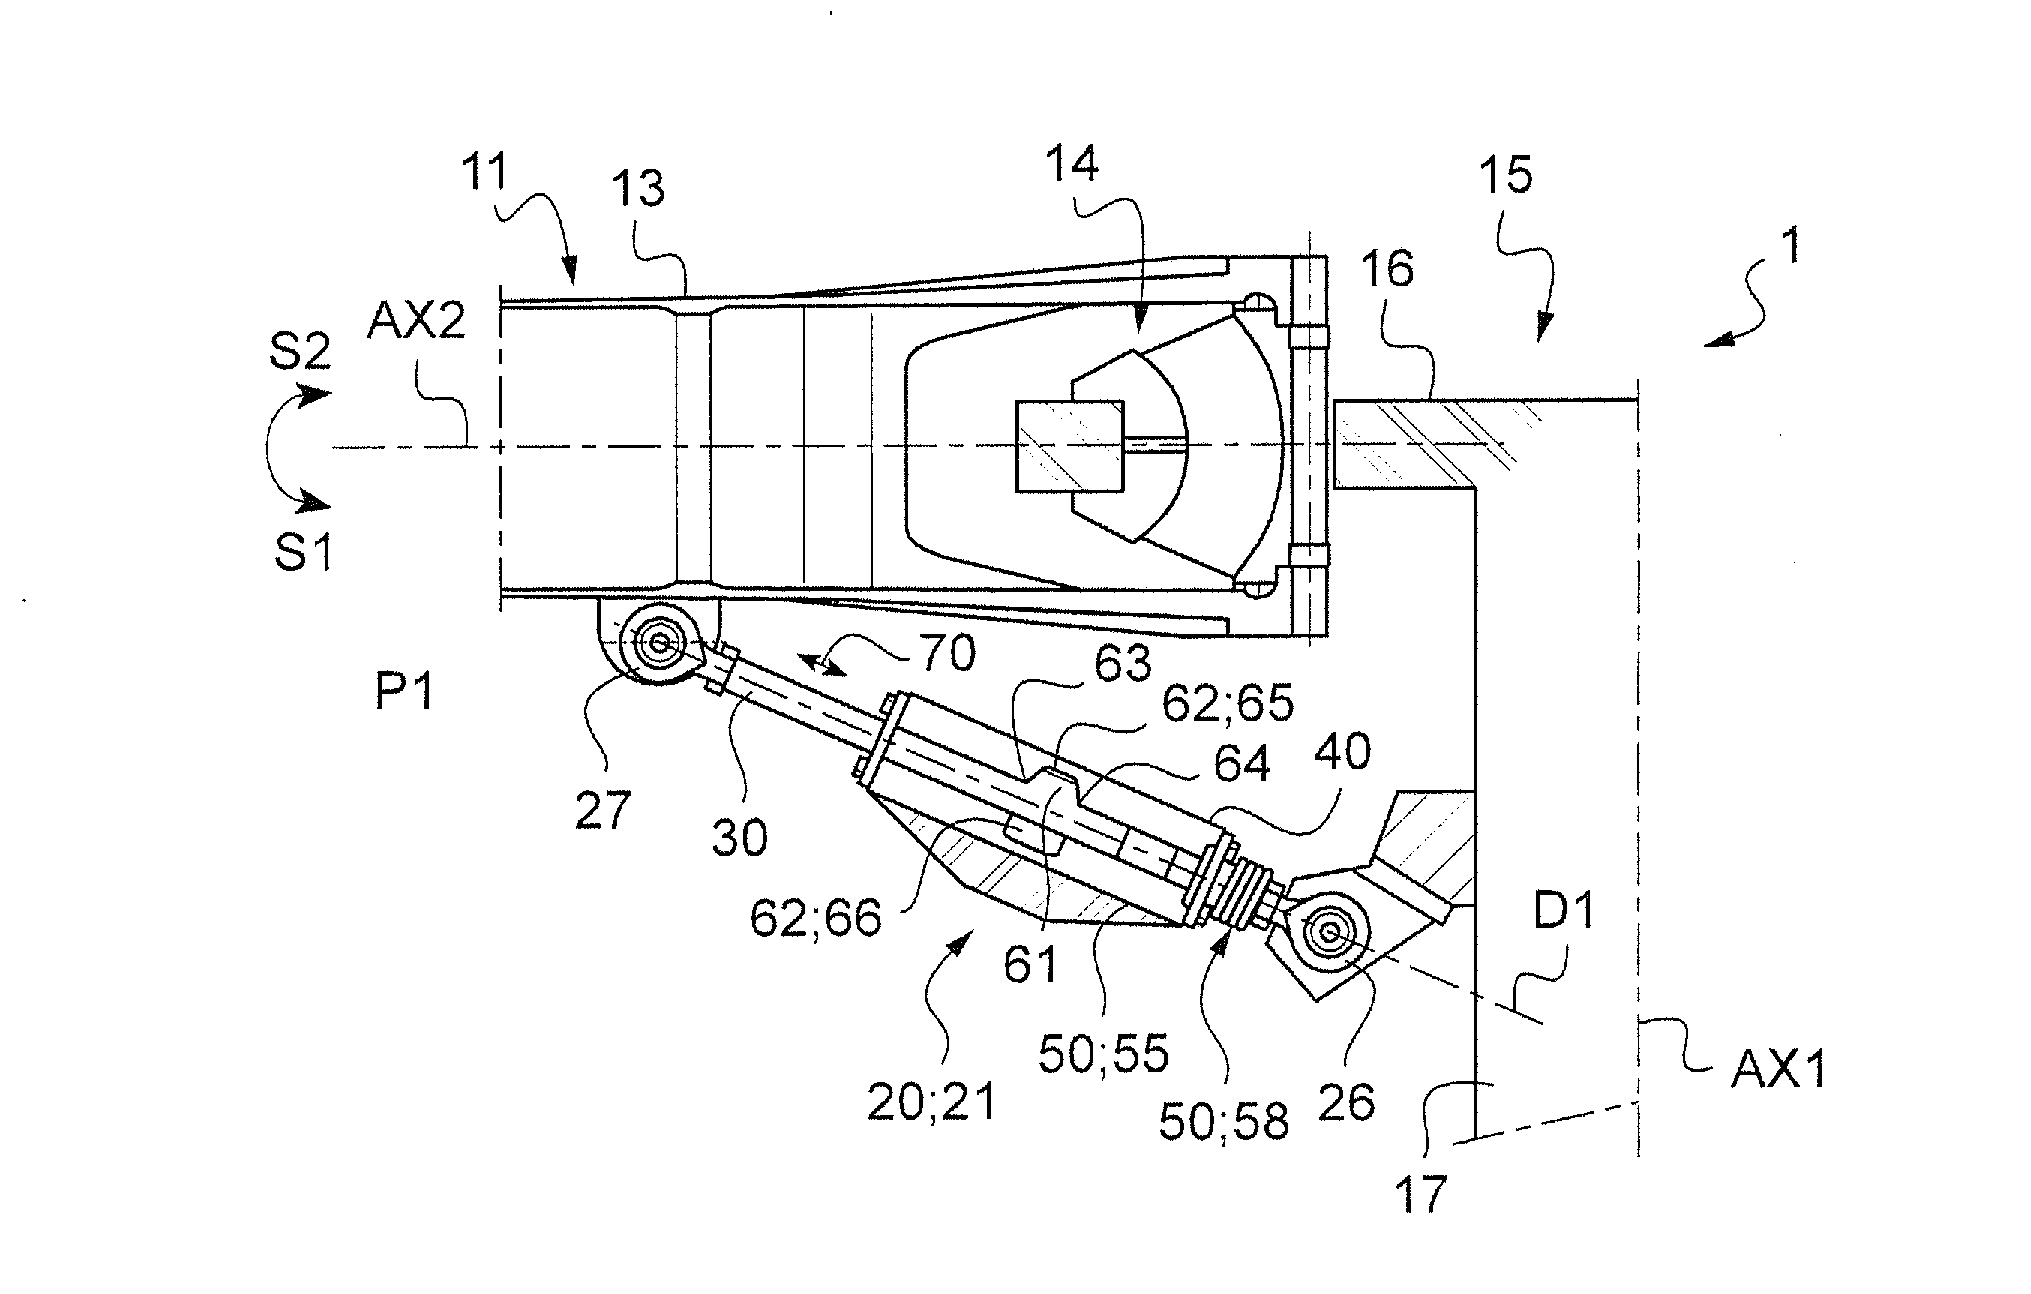 Flapping abutment mechanism for a lift assembly, a rotorcraft rotor including the abutment mechanism, and a rotorcraft